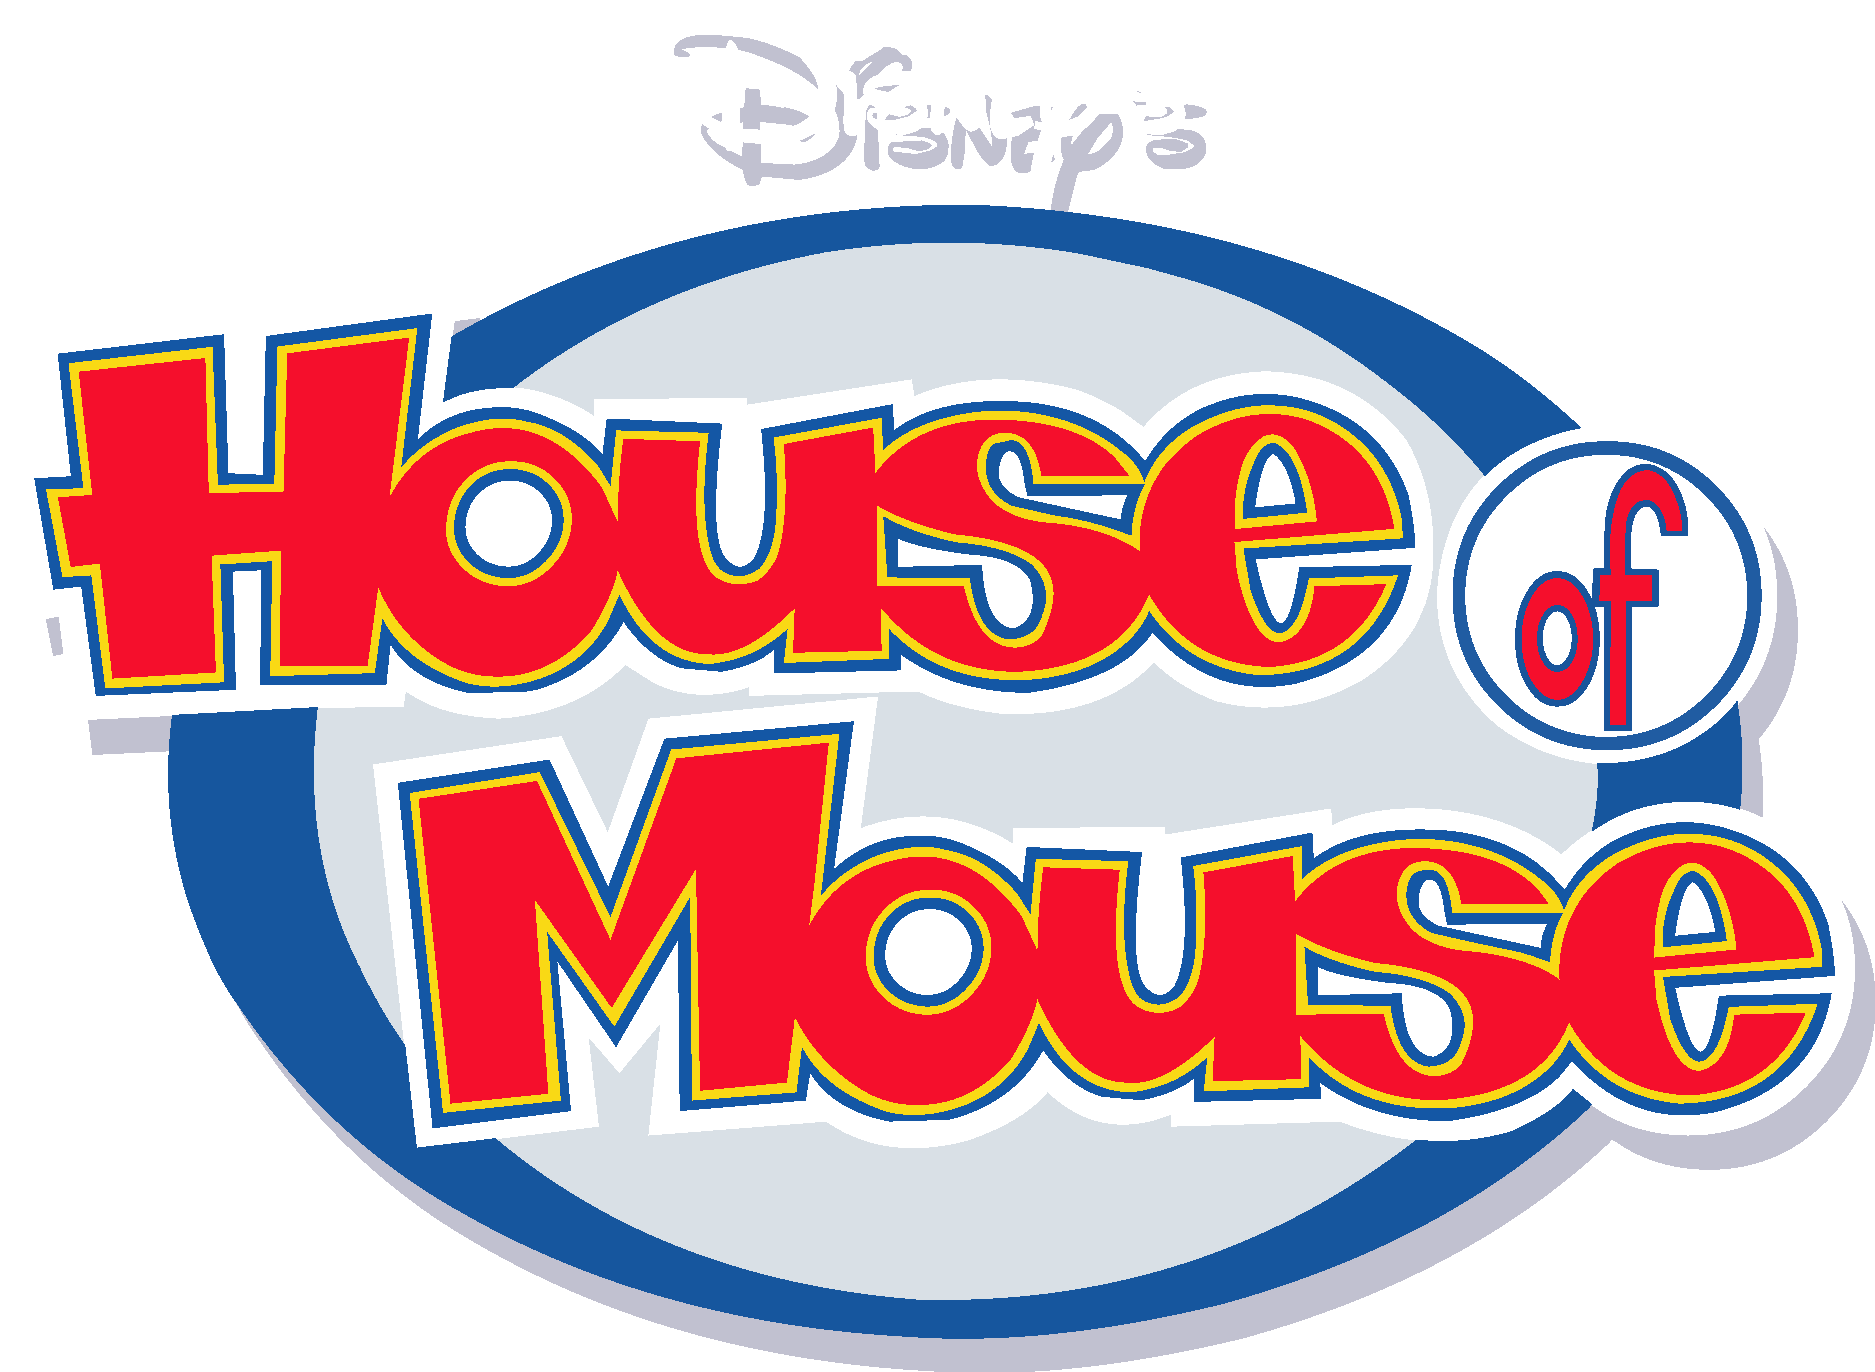 Mickey Mouse Clubhouse Logo PNG Vector (EPS) Free Download